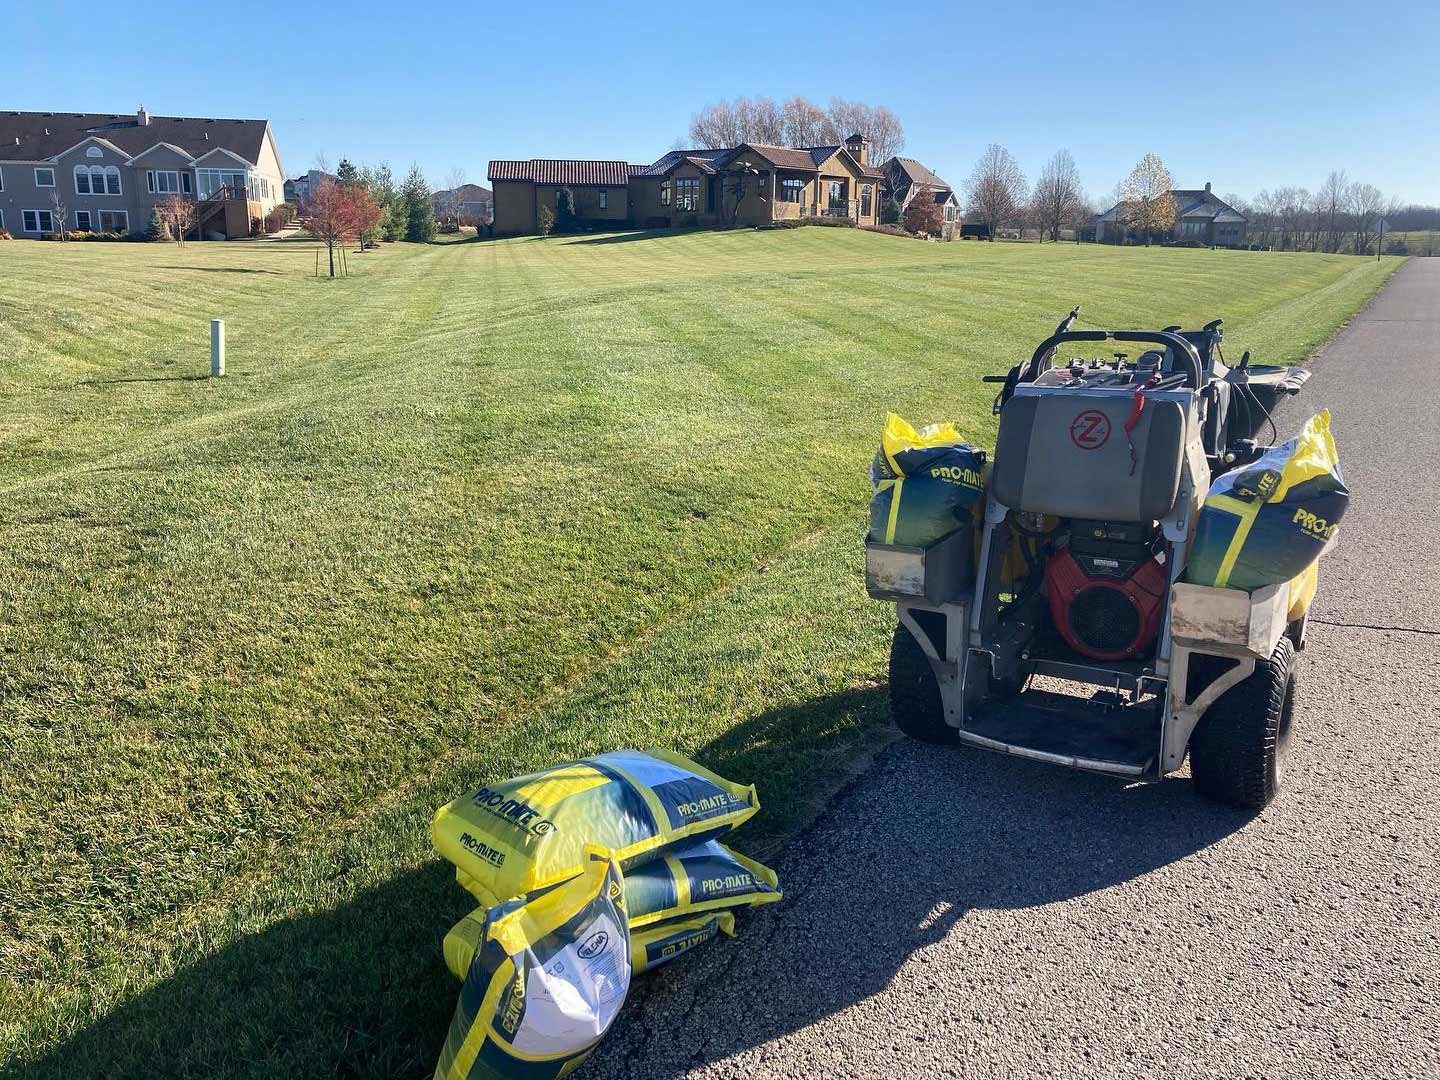 Lawn equipment at a home in Greenwood, IN.